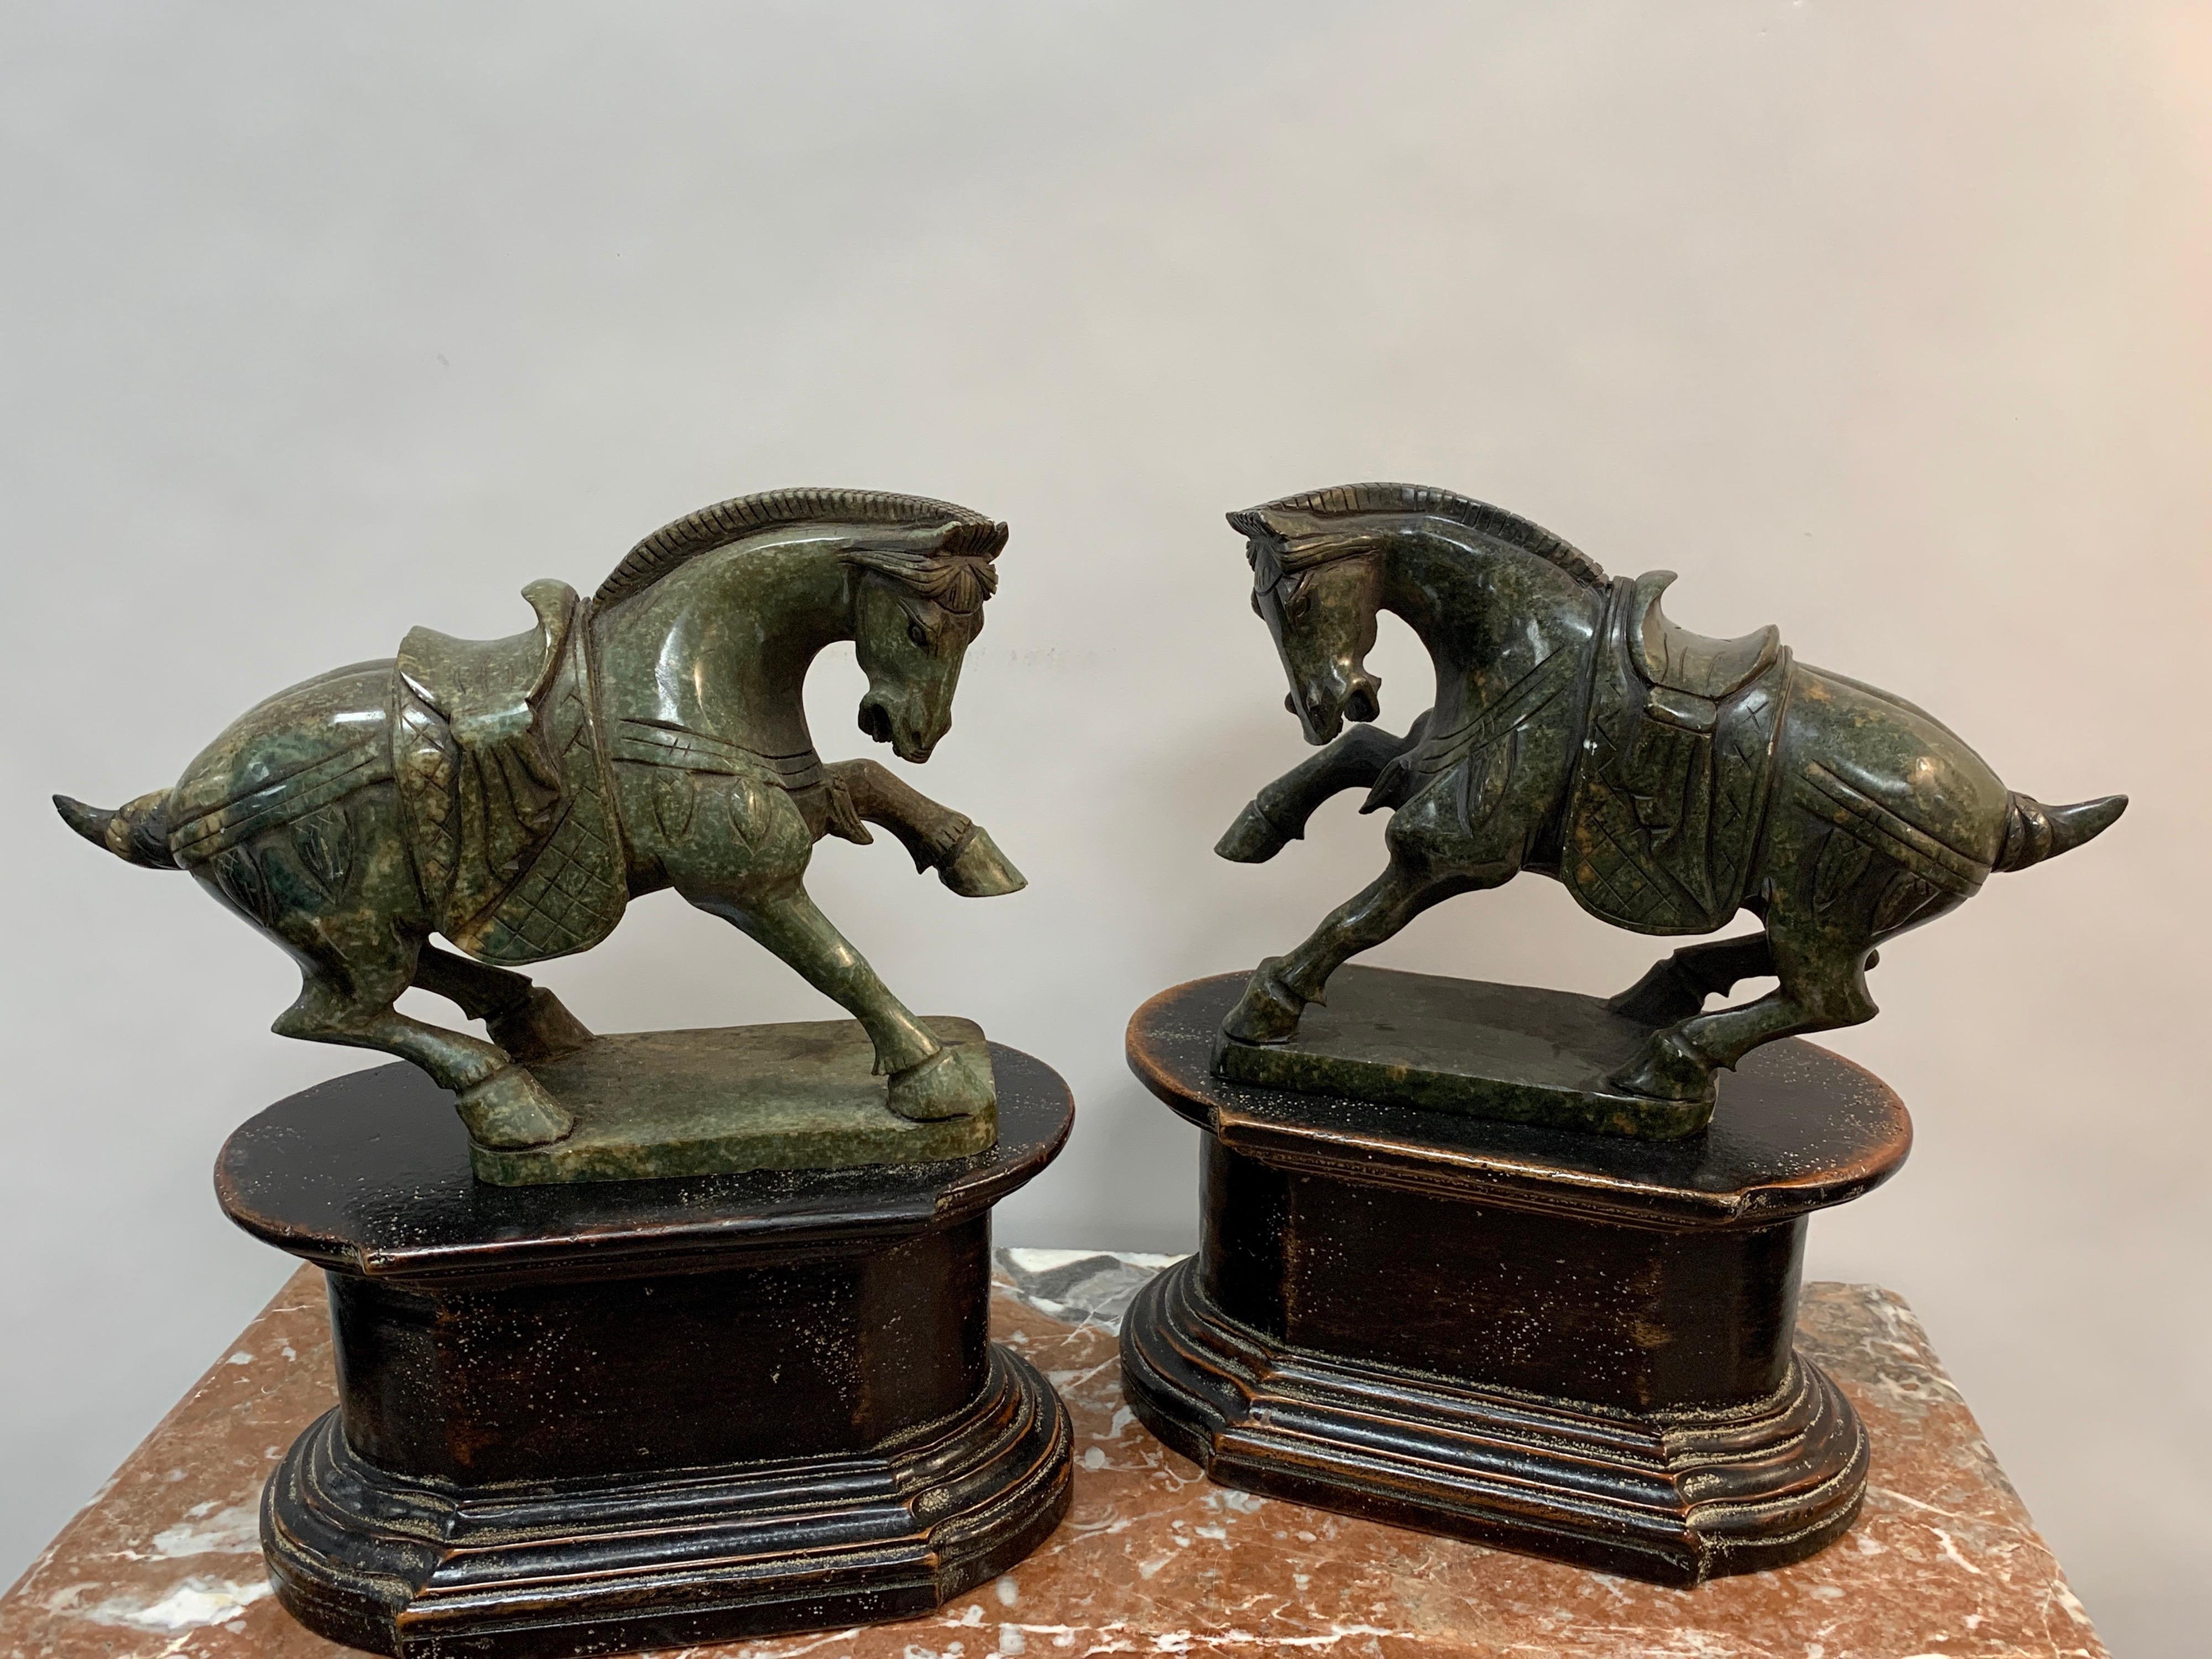 Pair of Chinese export hardstone horses and stands, each one finely carved of a standing horse with one leg up, facing left and right. Removable from the associated lacquered stands. Unmarked.
Two horses alone measure approximately 10